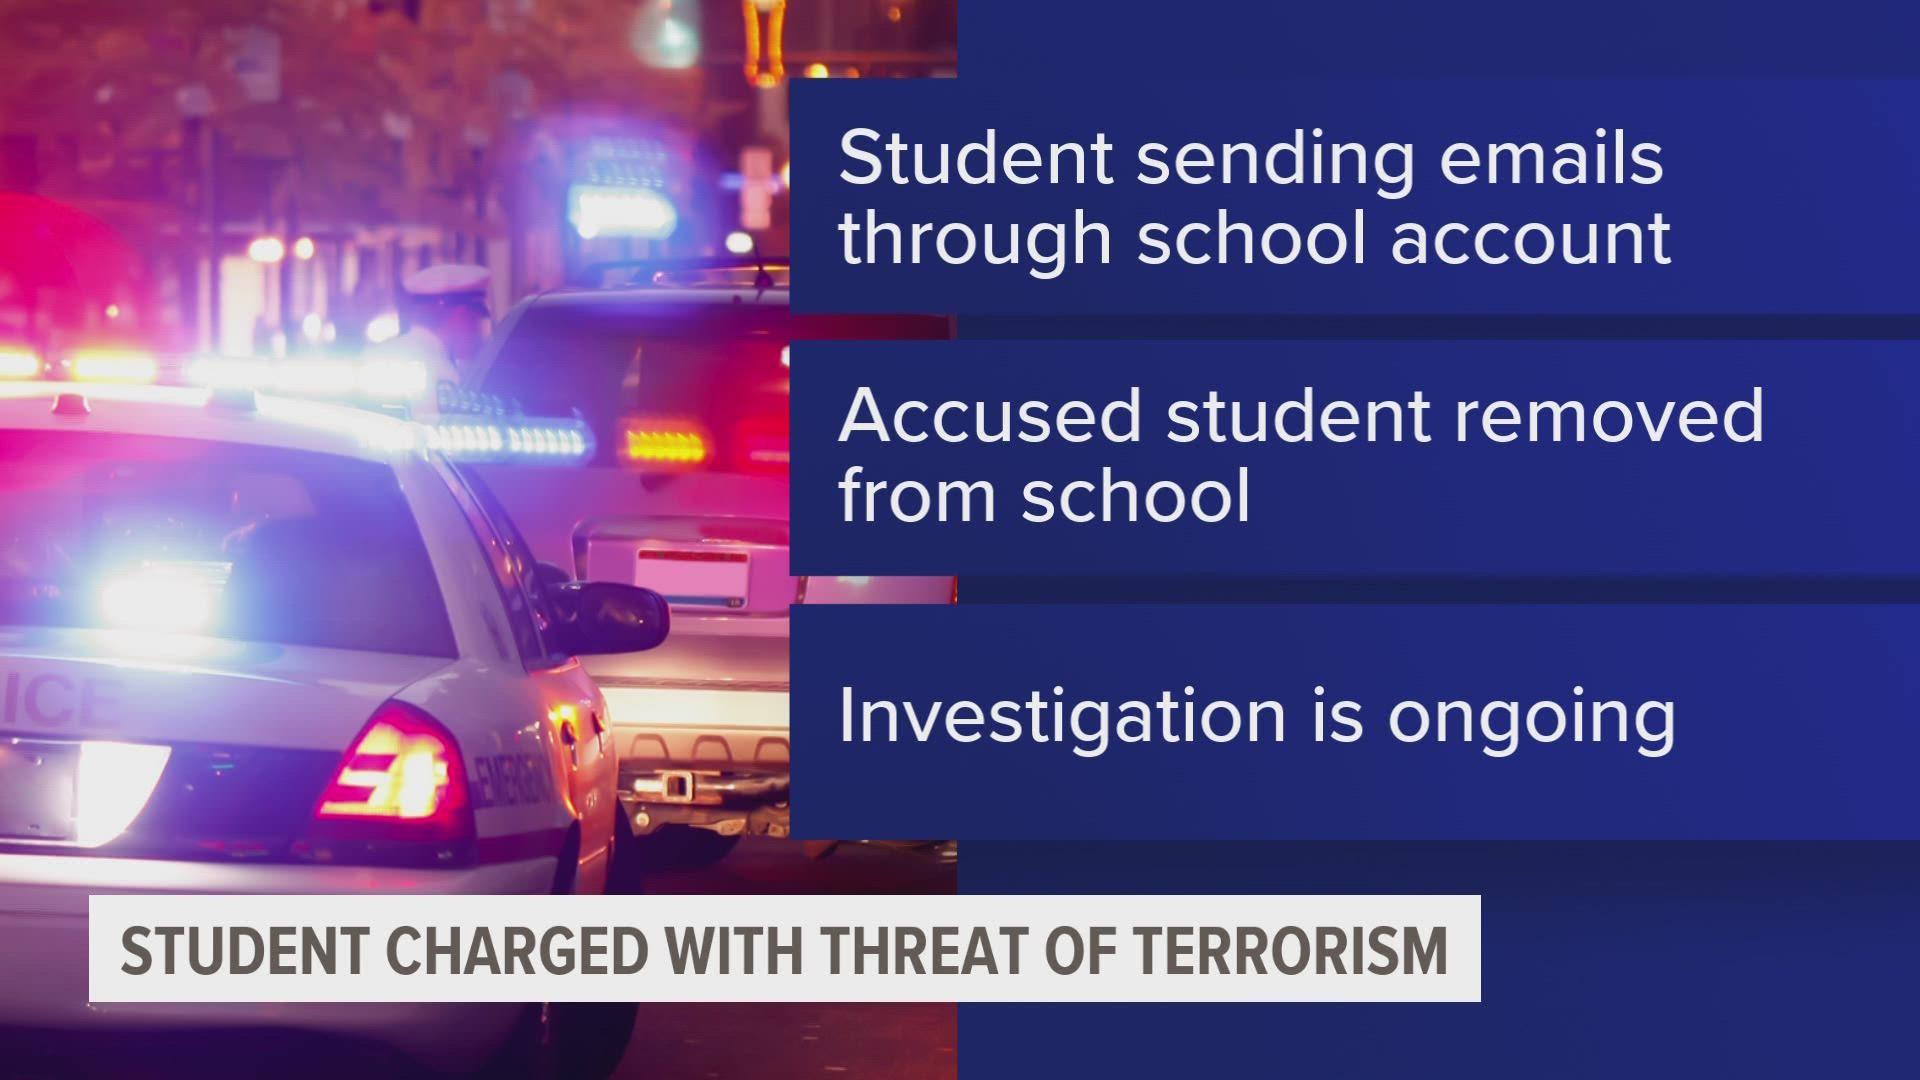 The 13-year-old student sending the emails was using a numbered code to hide certain words and other kinds of content in the emails, according to police.